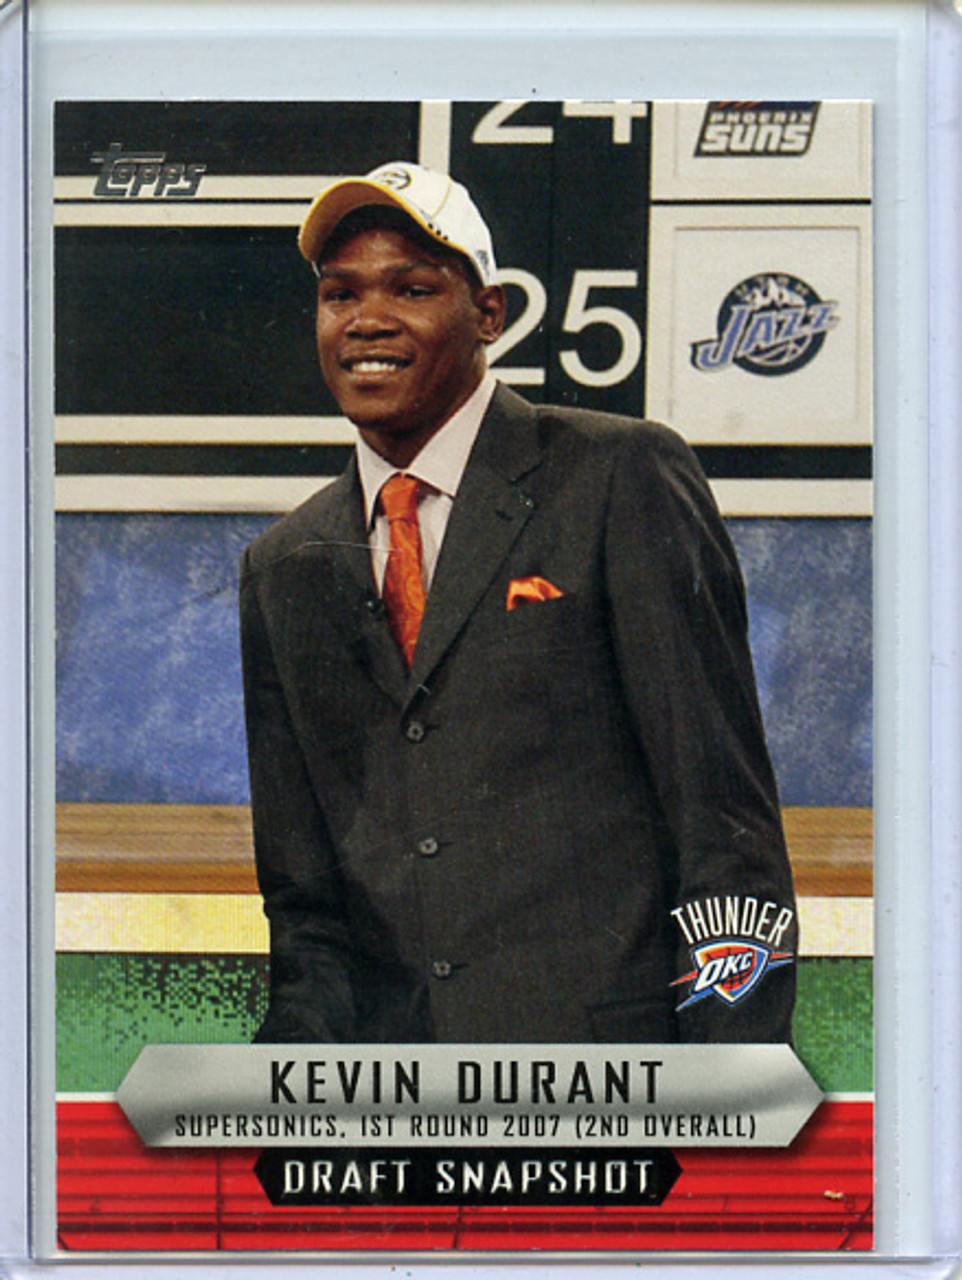 Kevin Durant 2009-10 Topps, Draft Snapshot #DS-KD